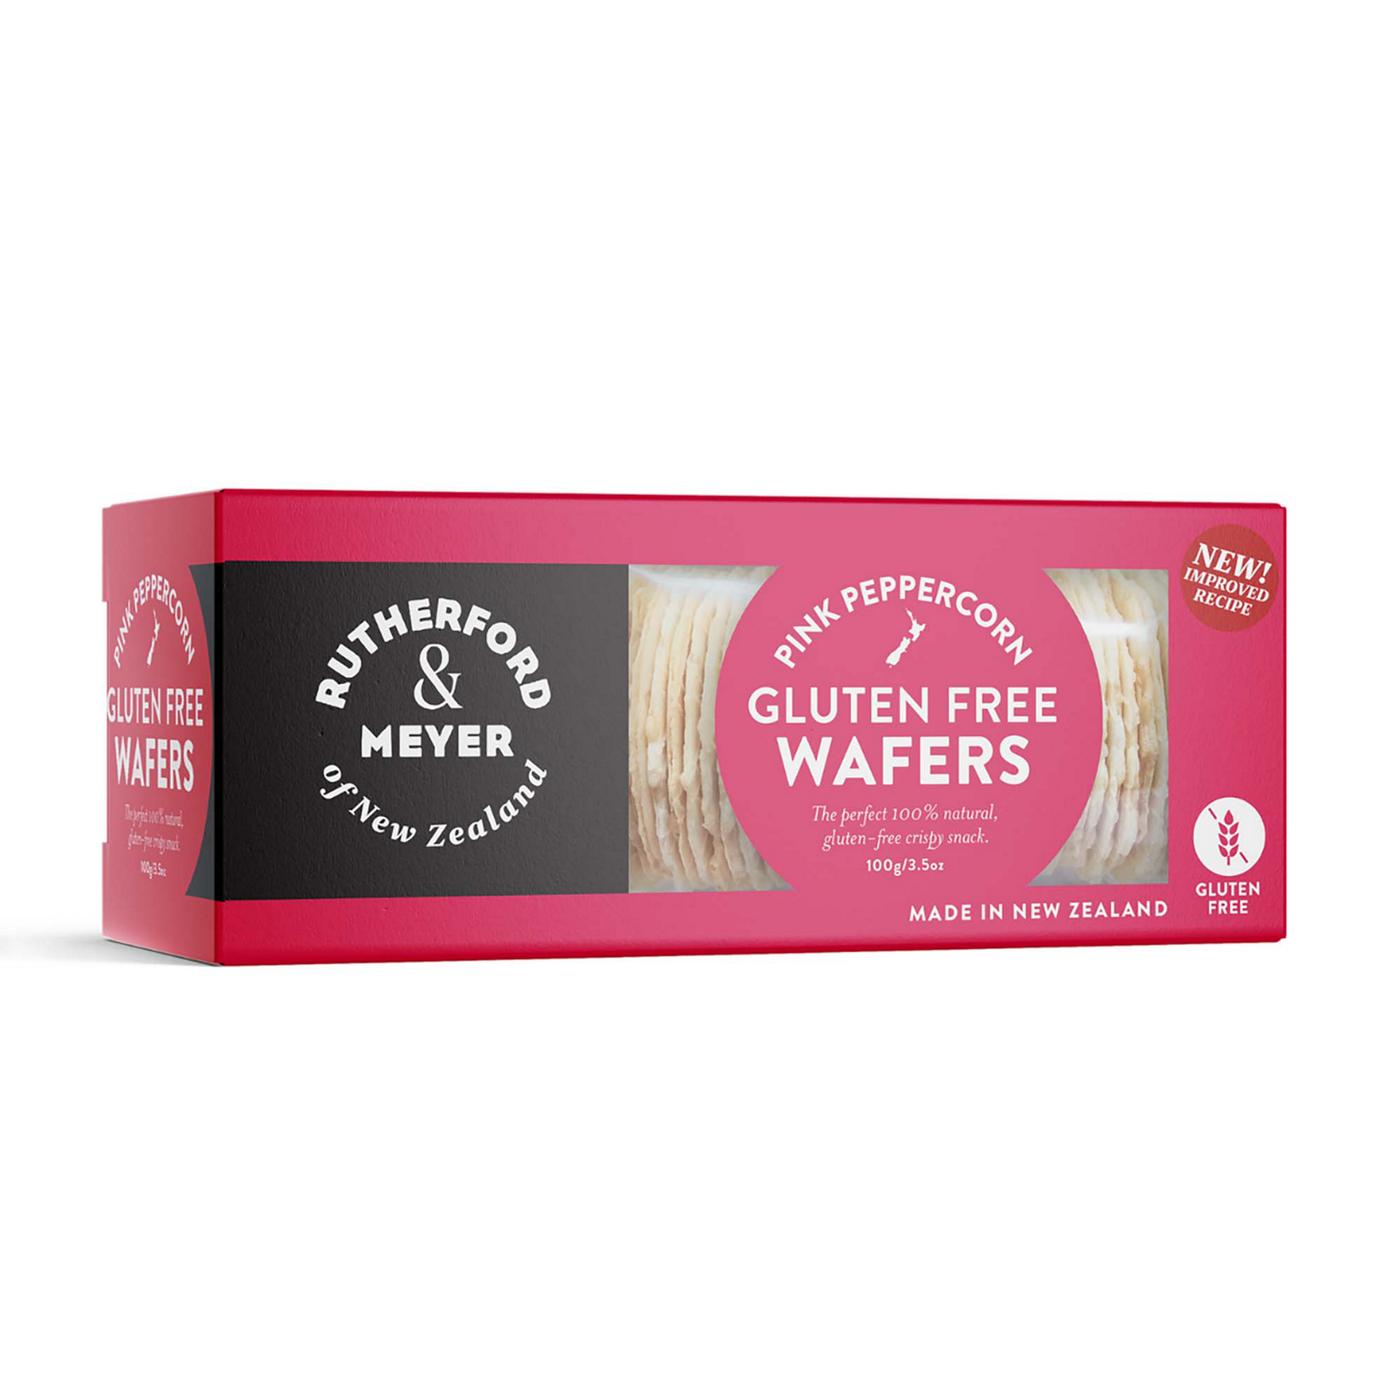 Rutherford & Meyer Gluten-Free Wafers Crackers - Pink Peppercorn; image 1 of 2